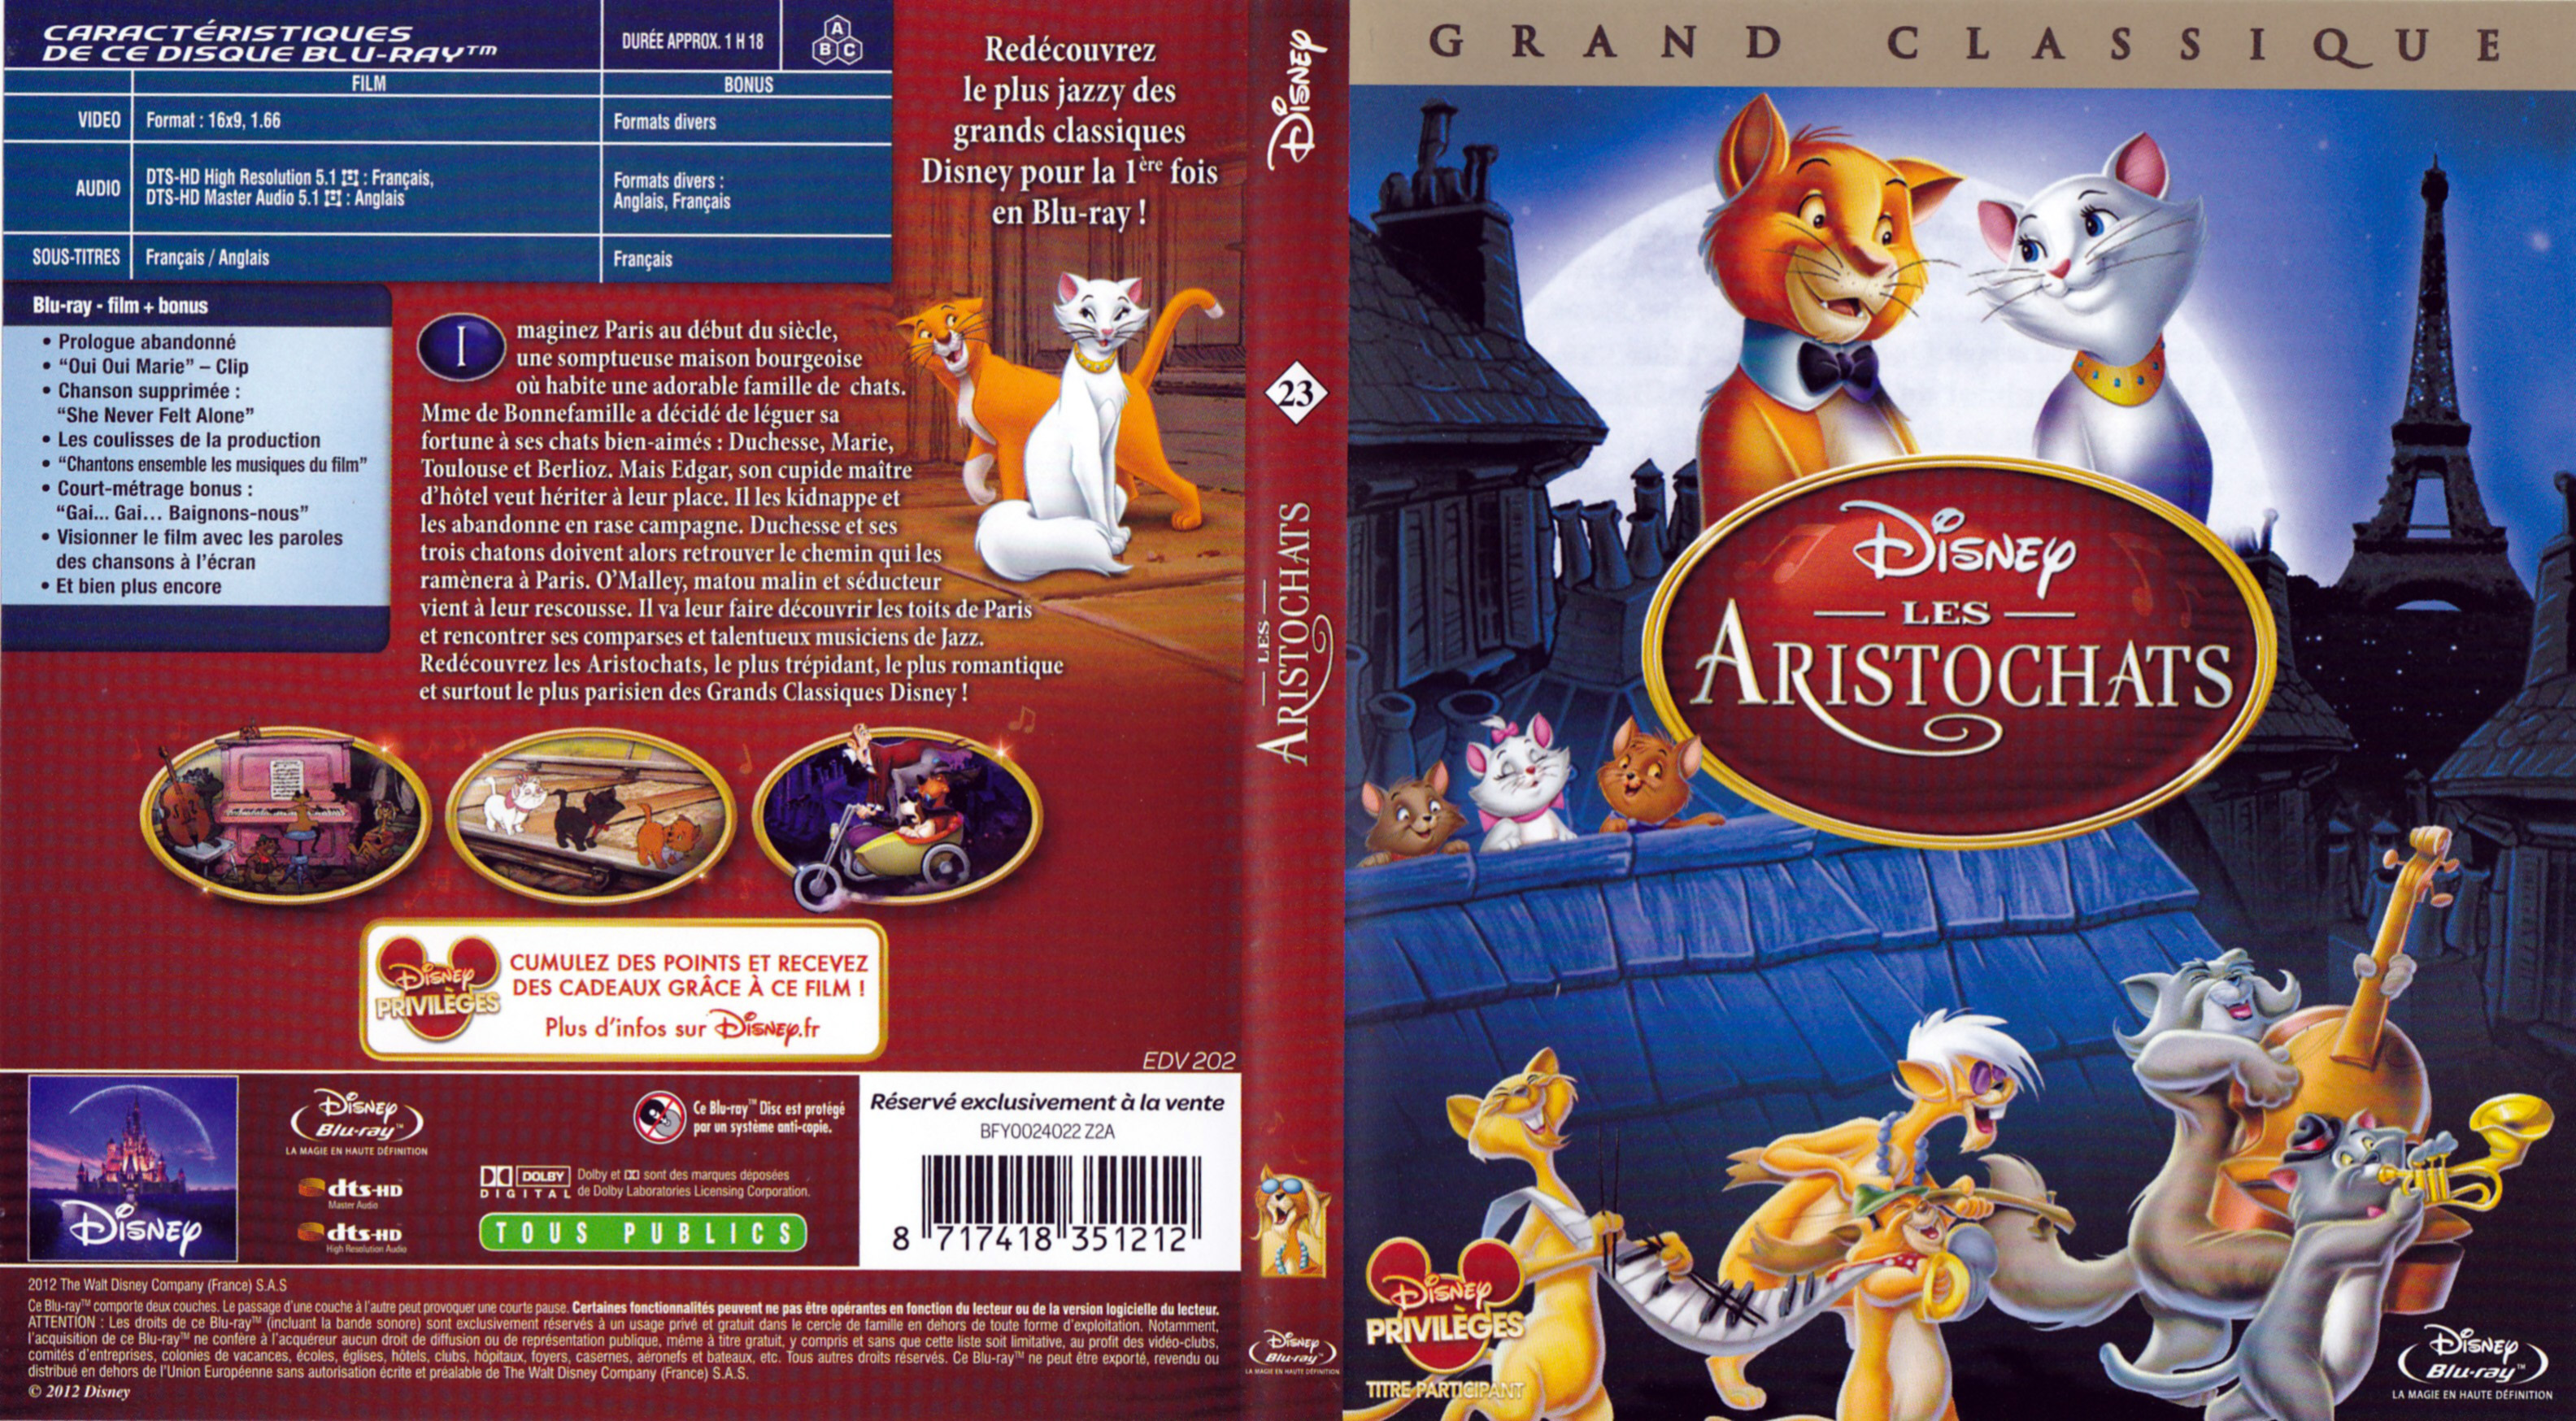 Jaquette DVD Les aristochats (BLU-RAY)